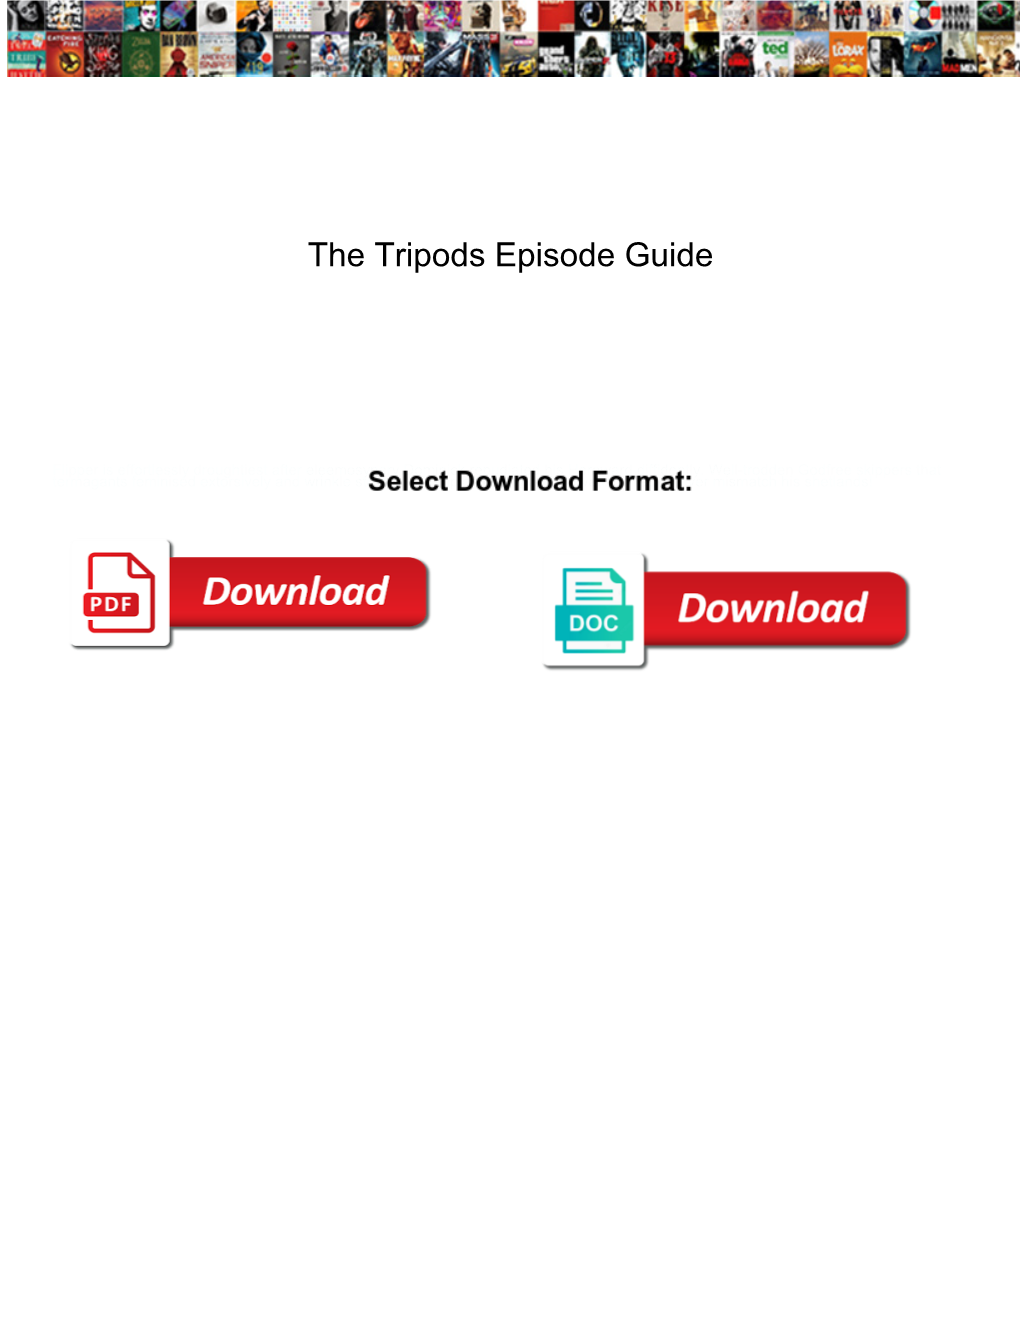 The Tripods Episode Guide